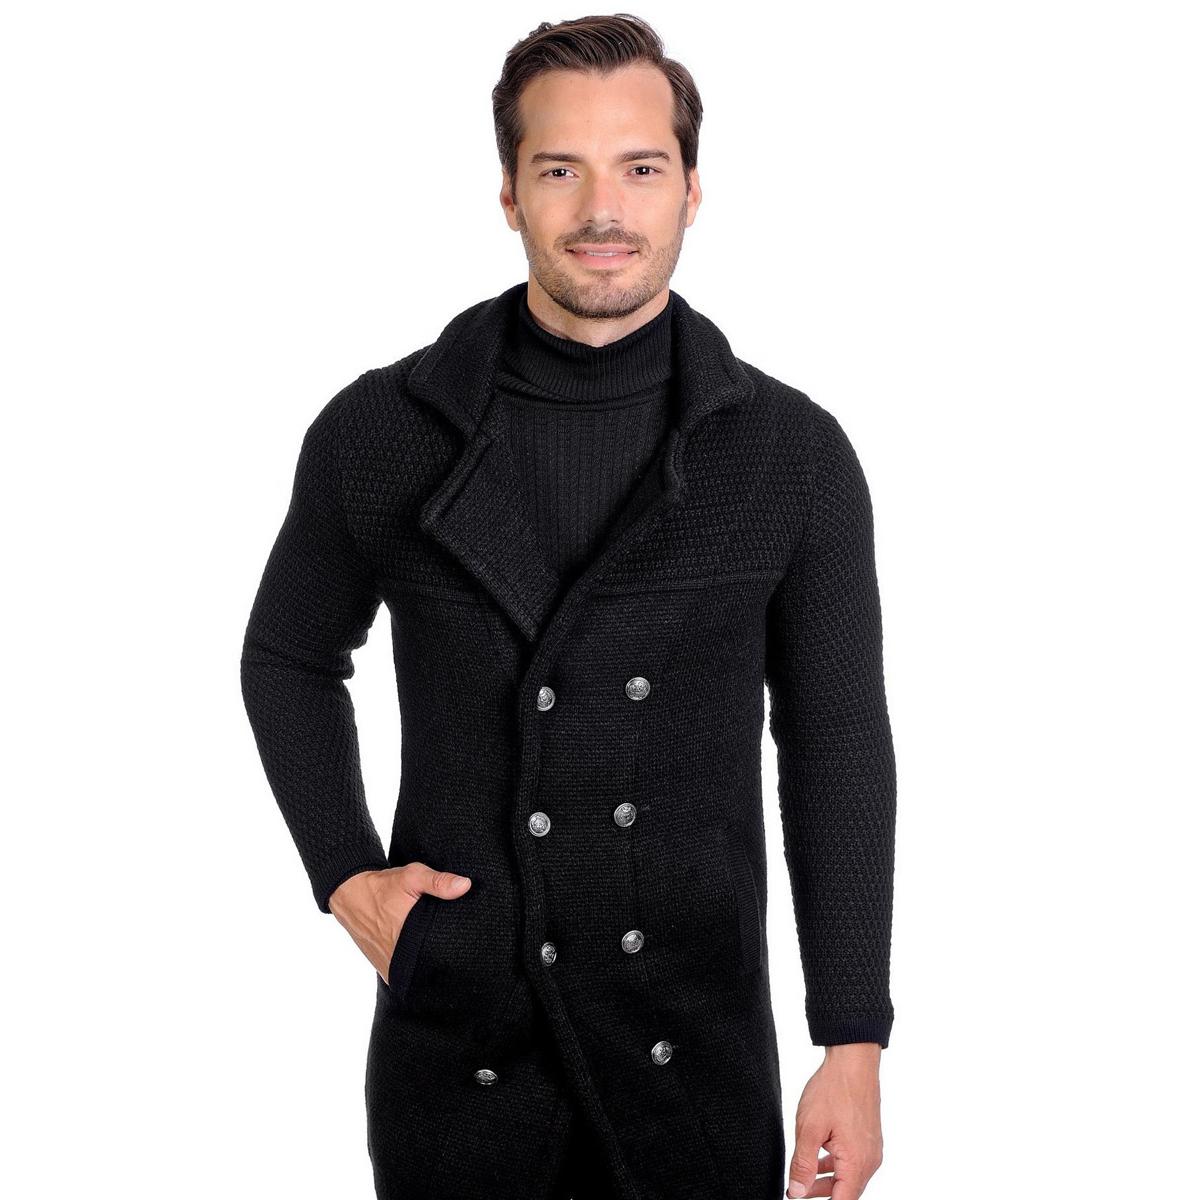 LCR Double Breasted Black Wool Blend Sweater for Men - 3/4 Length